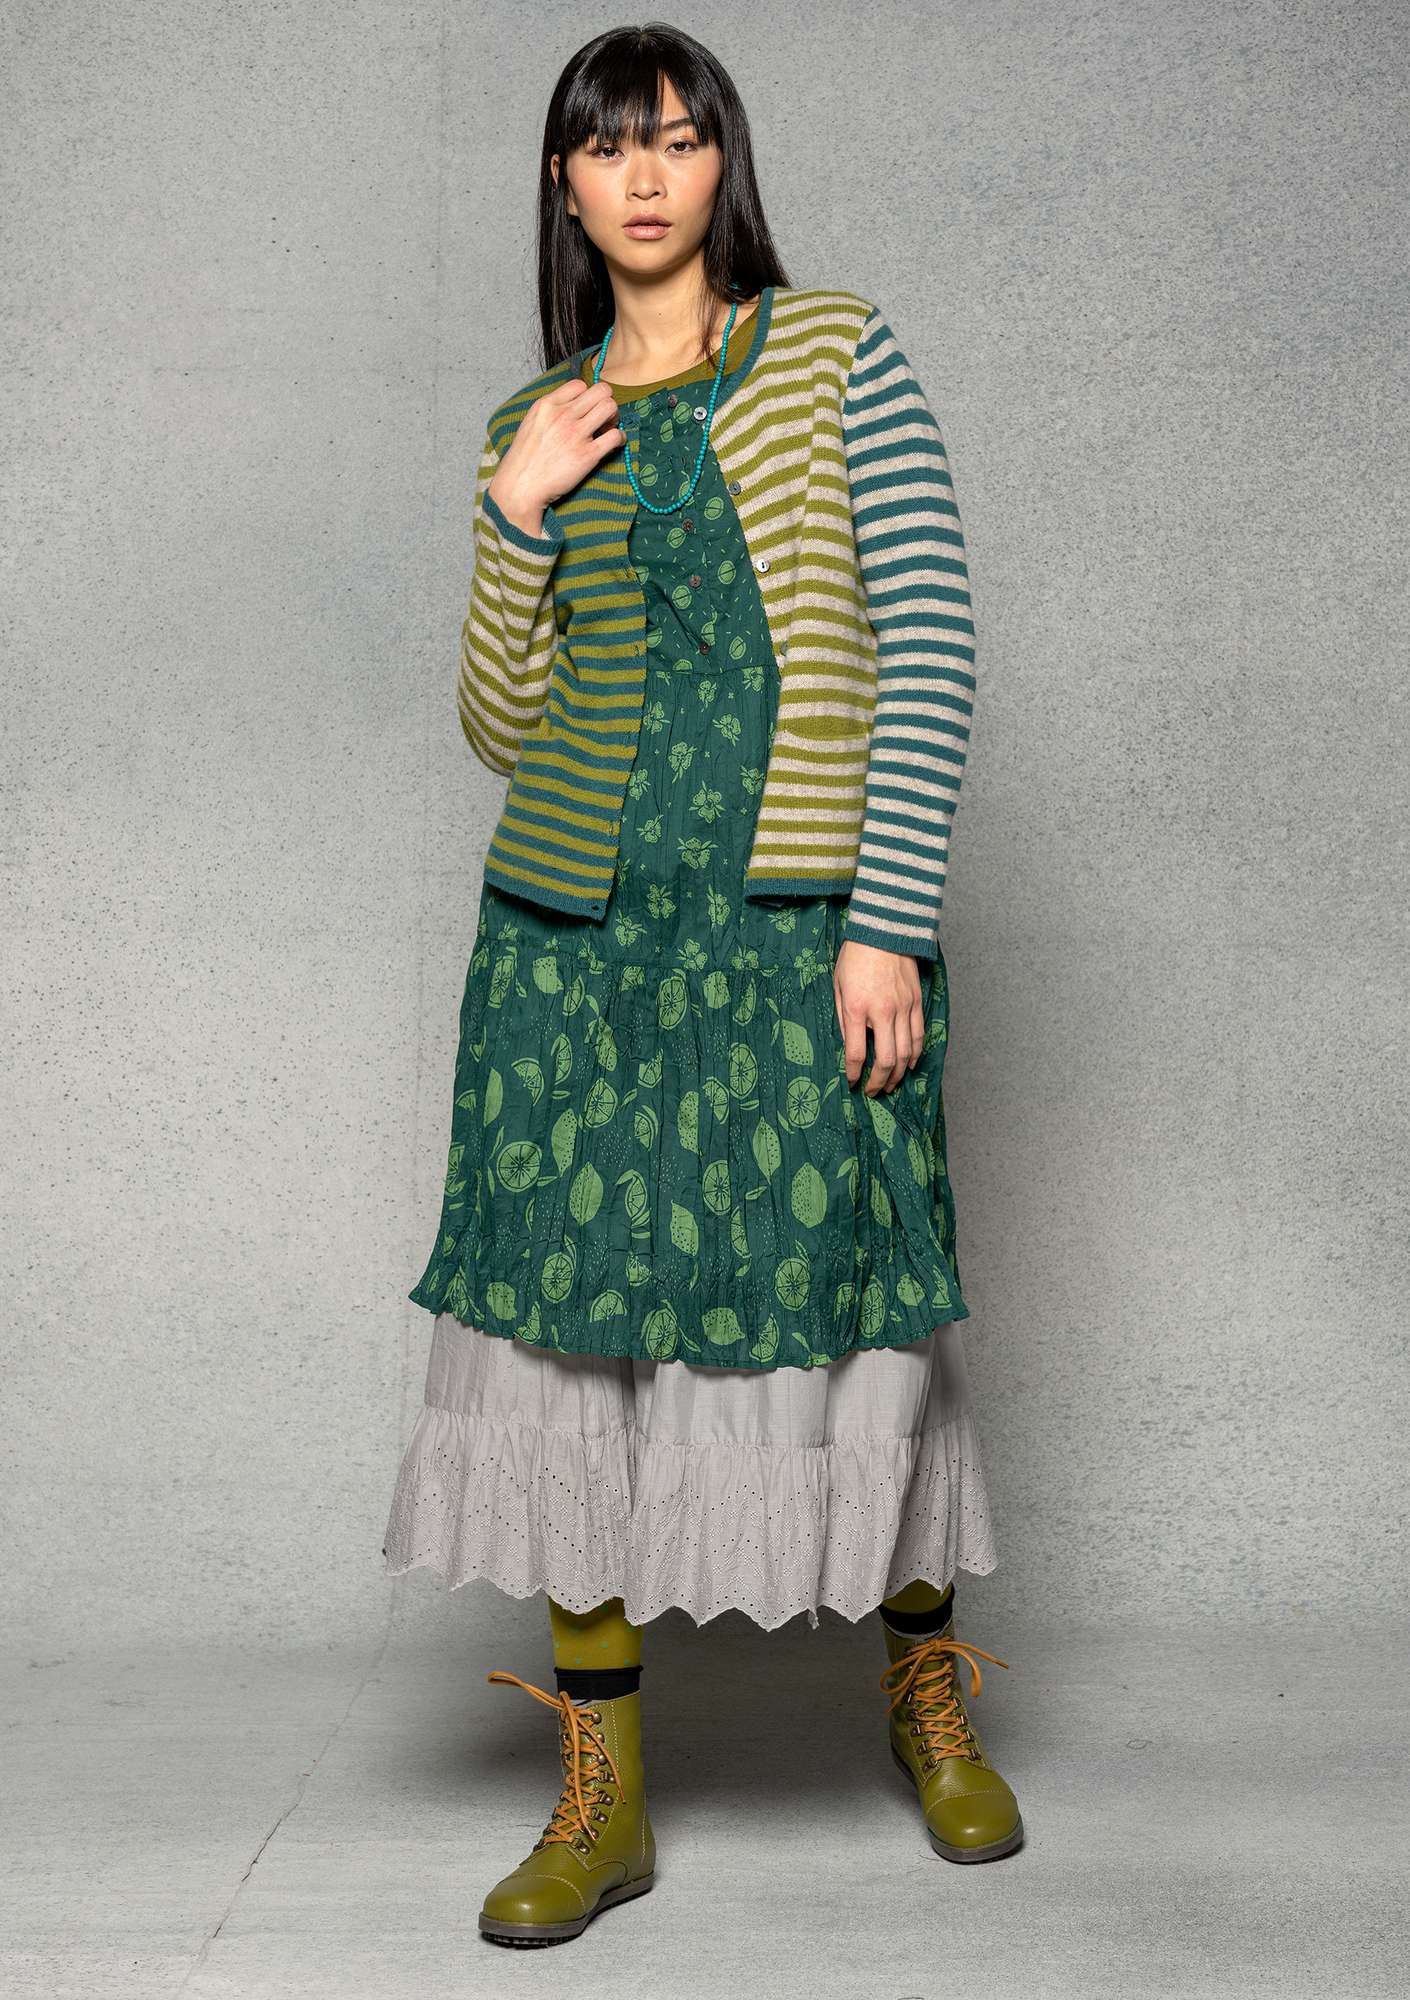 “Fruits” dress in woven organic/recycled cotton bottle green/print thumbnail